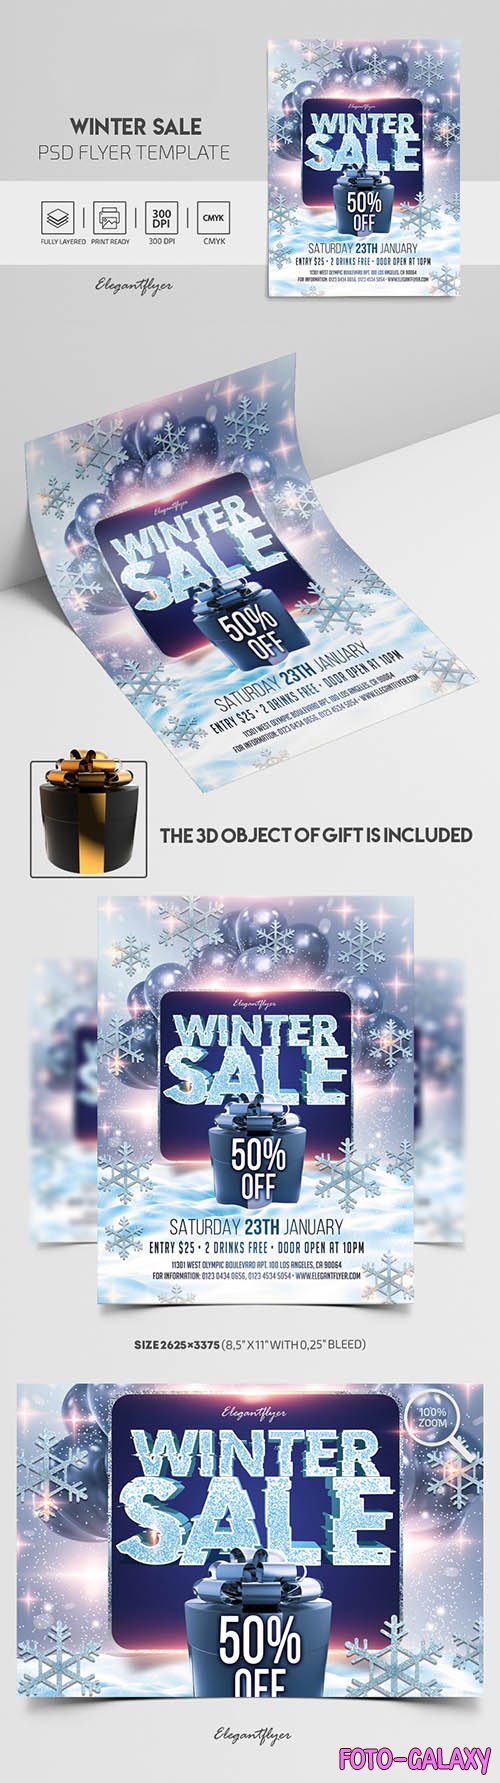 White Starry Winter Sale Flyer Template